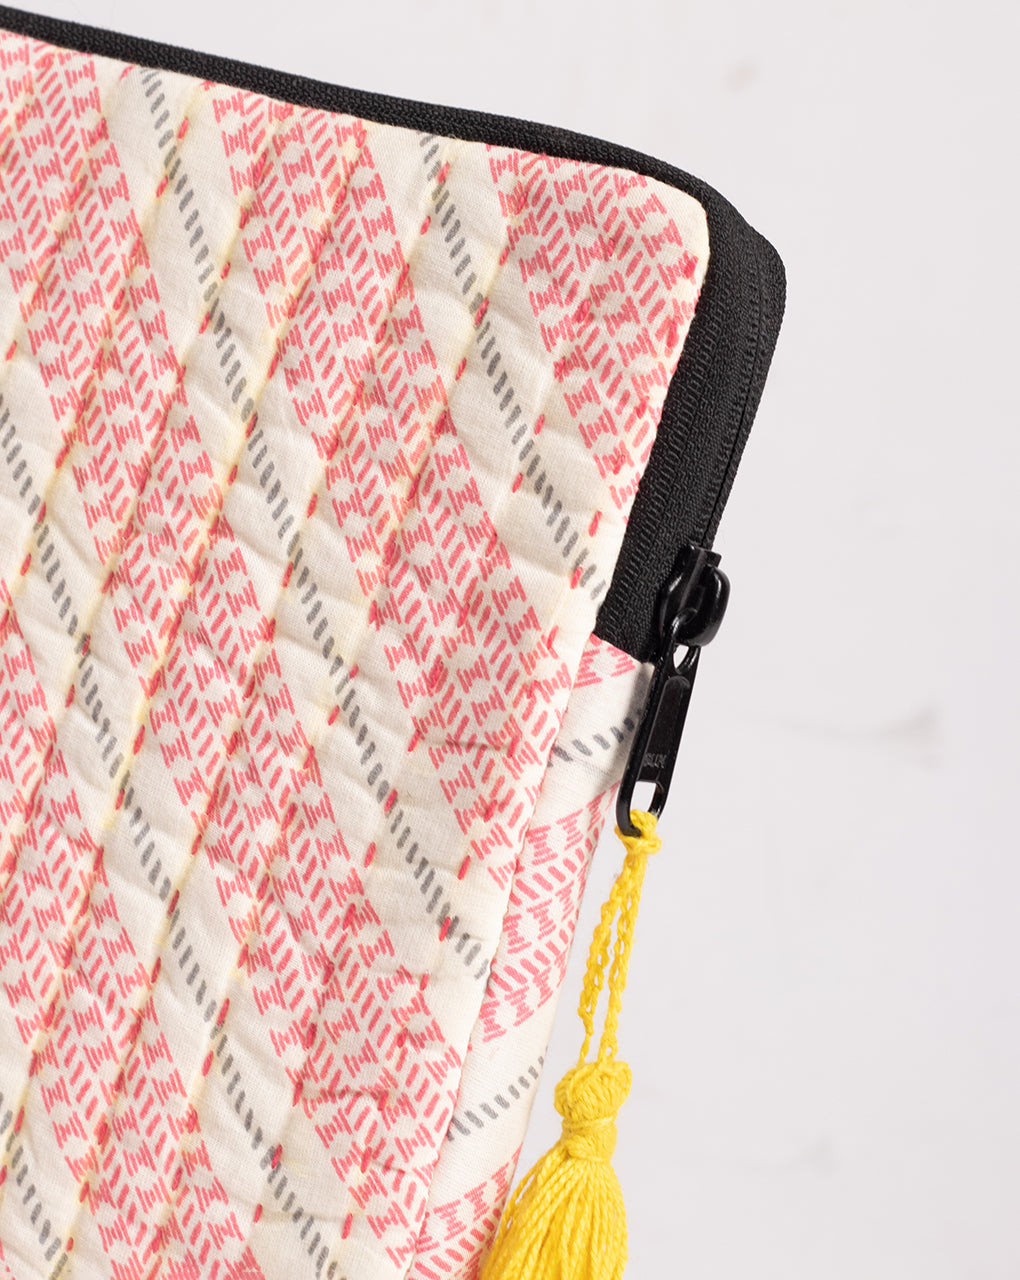 Stripes Kantha Quilted Laptop Sleeve - Fabriclore.com